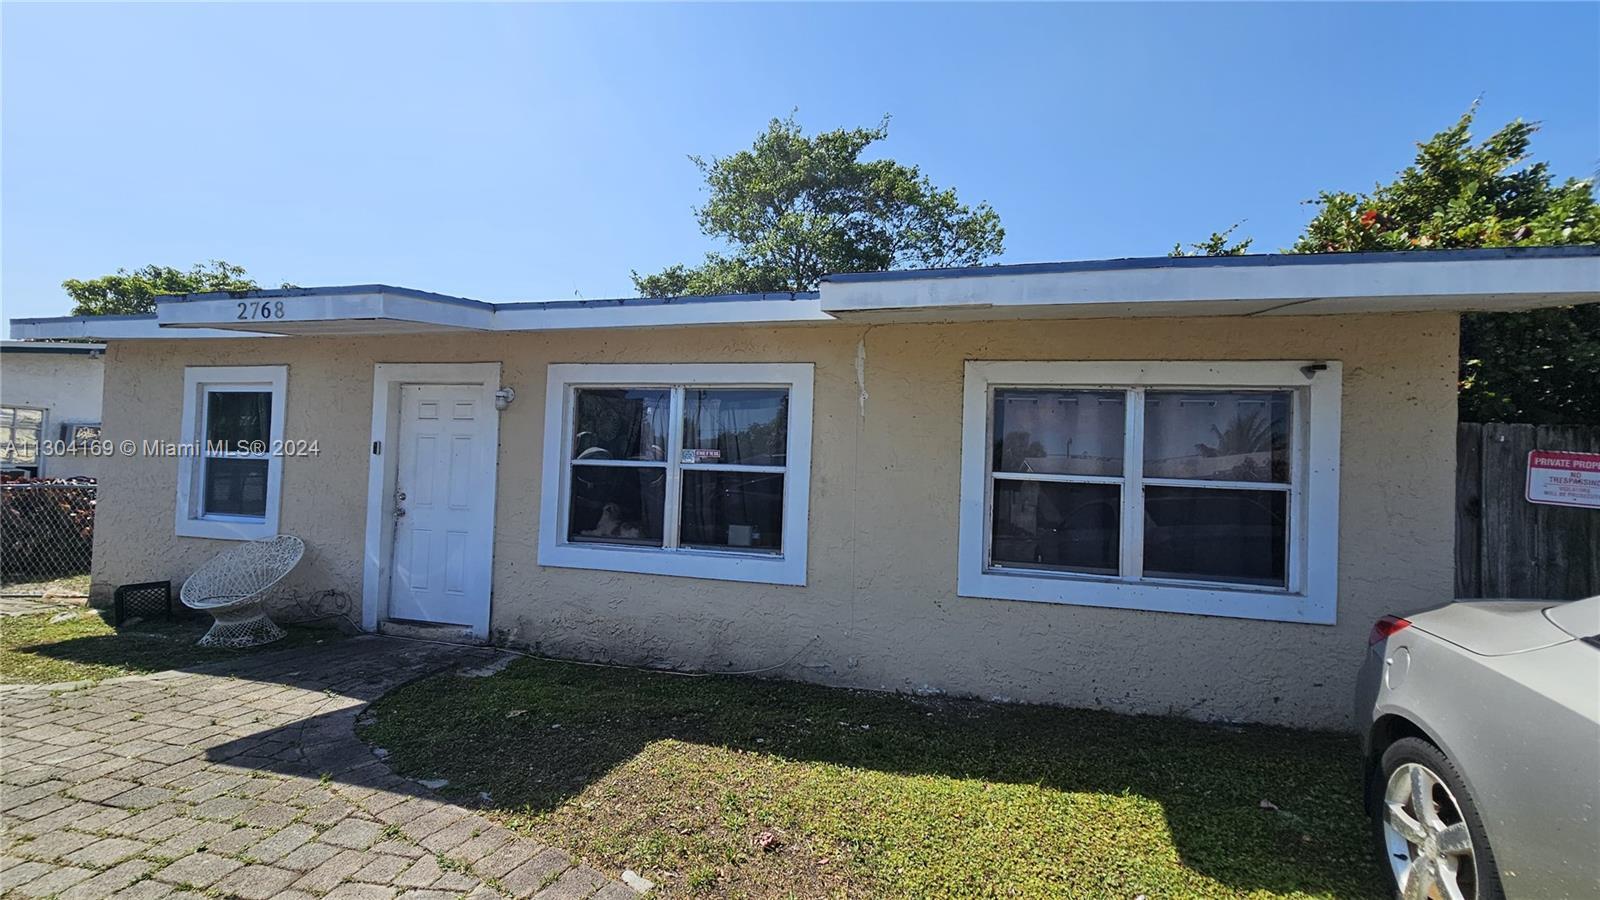 No HOA. Current ROI: 7.6% (potential ROI: 8.25%). Great investment property. The property is rented 